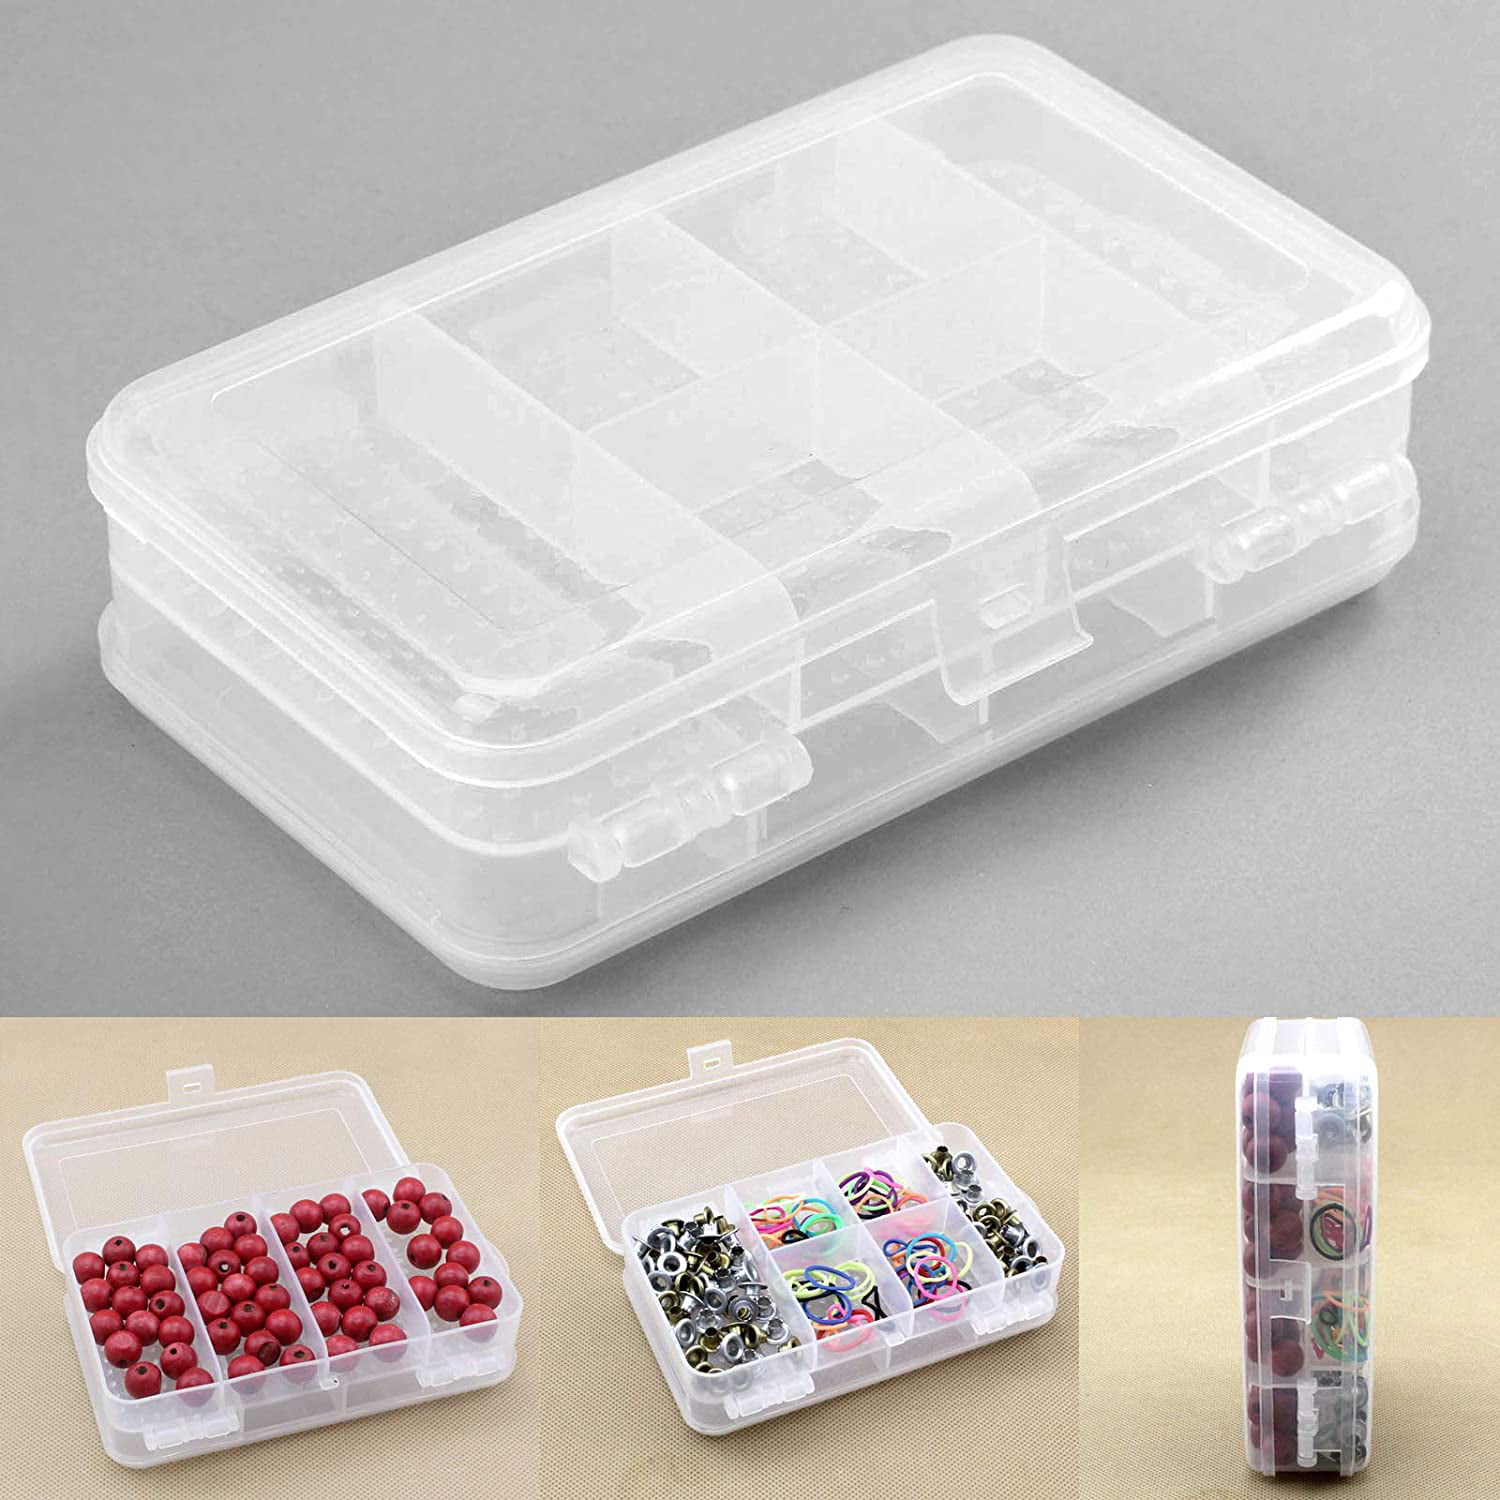 Lot of 6 Containers 4 Compartment Plastic Craft Storage Organizer Beads Jewelry 